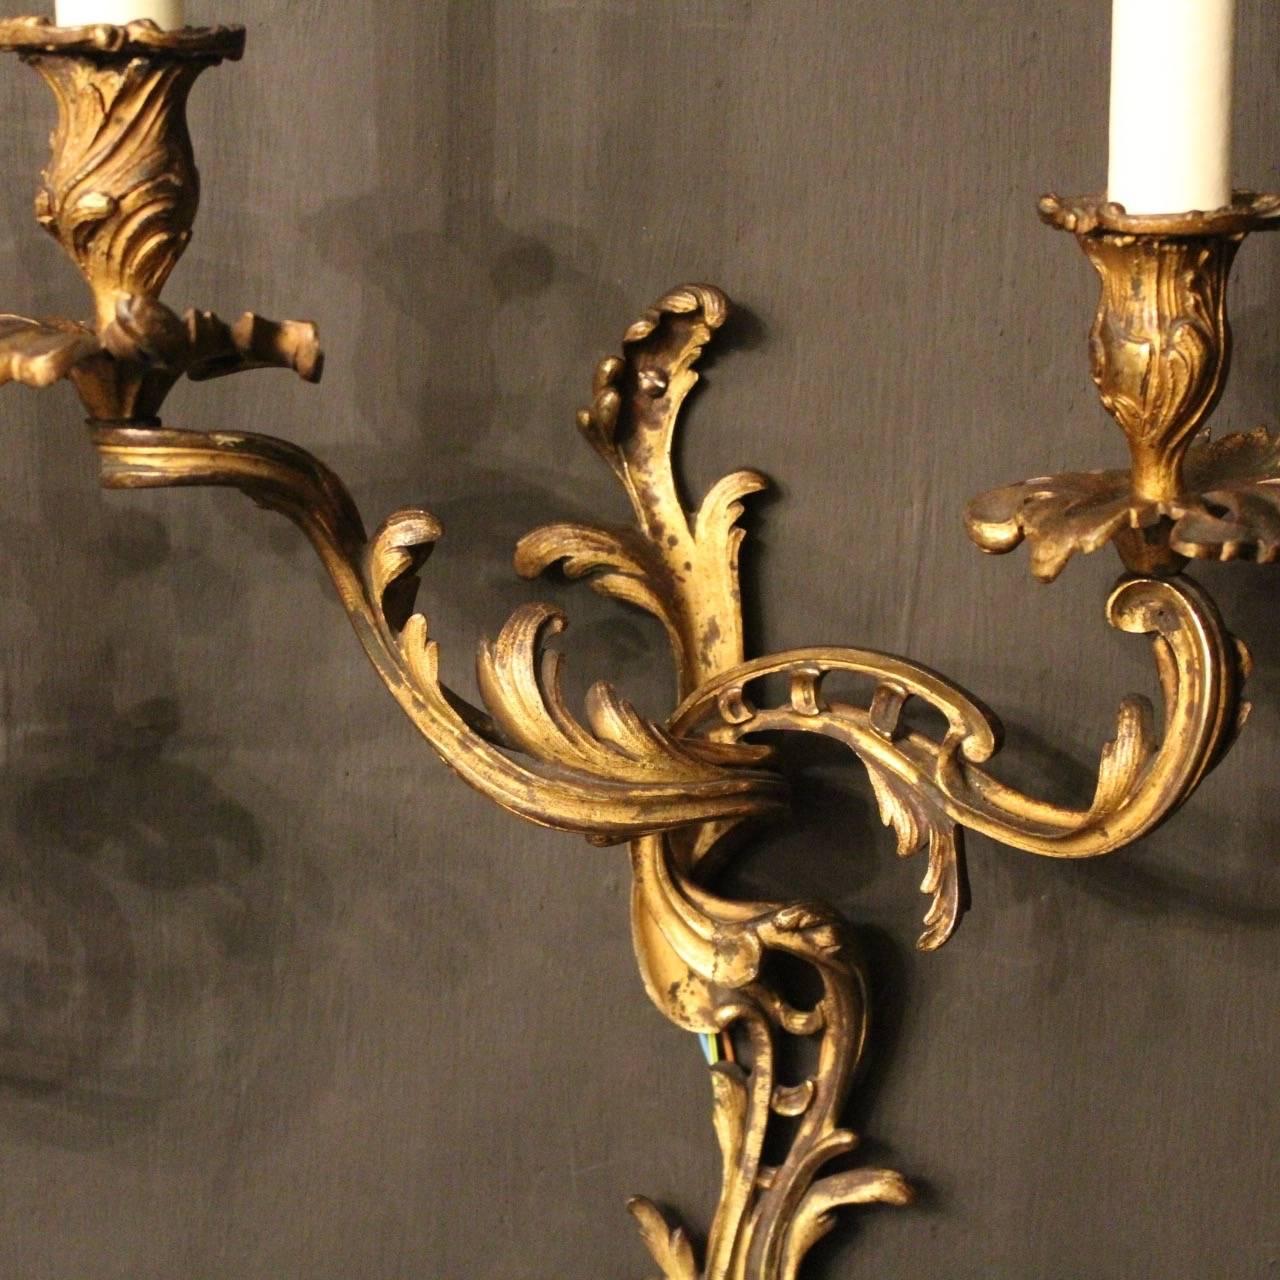 A French pair of gilded bronze twin arm antique wall sconces, the acanthus leaf scrolling arms with leaf bobeche drip pans and bulbous candle sconces, issuing from an ornate leaf pierced backplate, good original gilded patination and nice